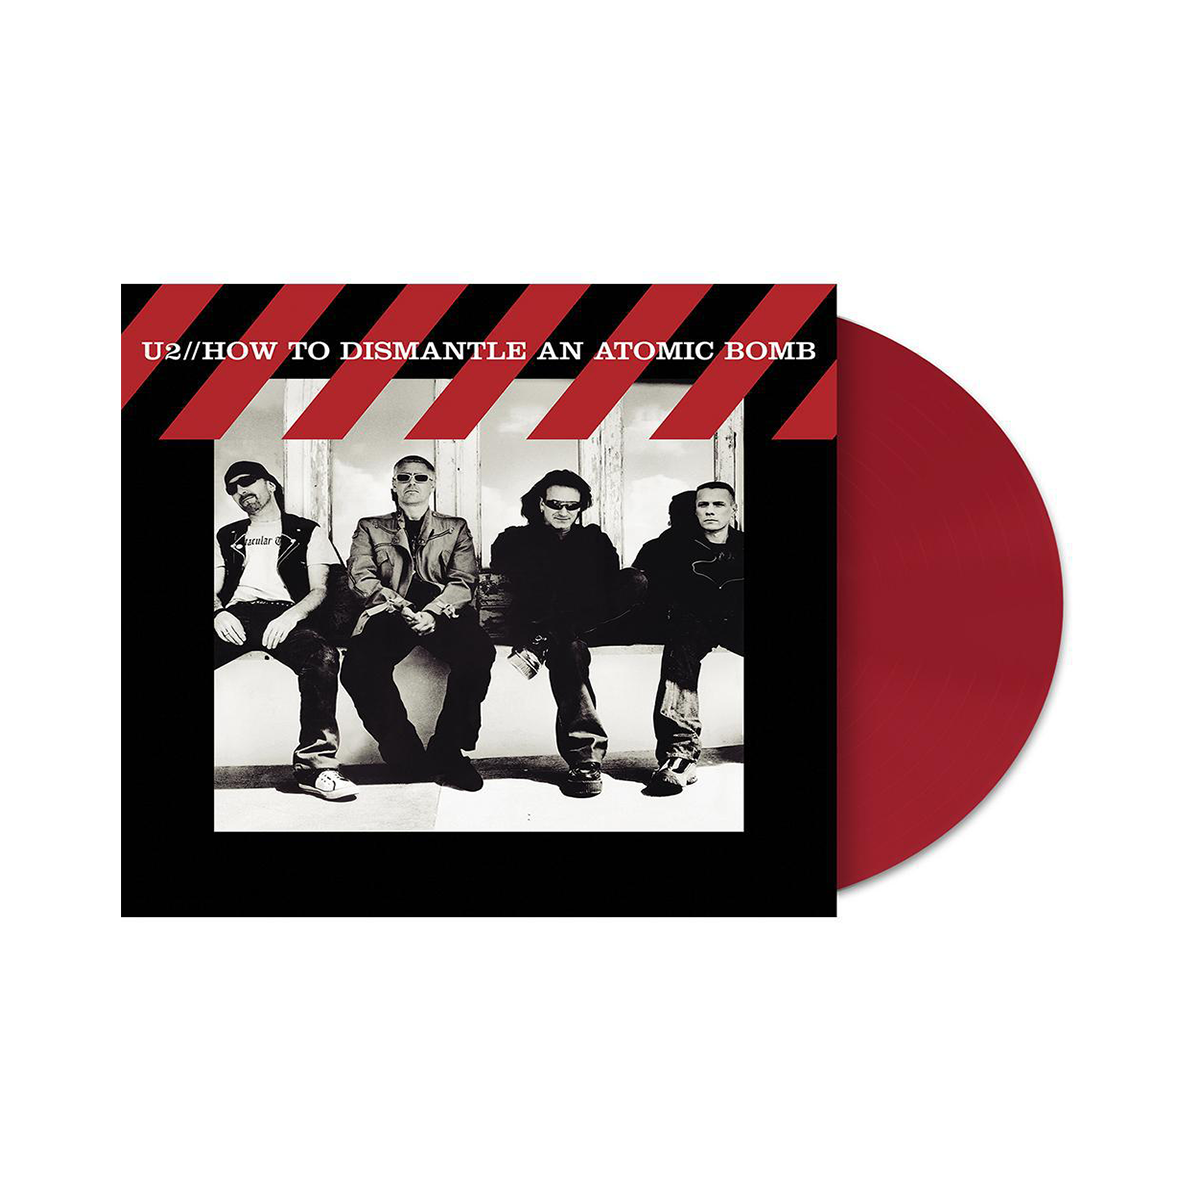 How To Dismantle An Atomic Bomb Limited Edition Red Vinyl